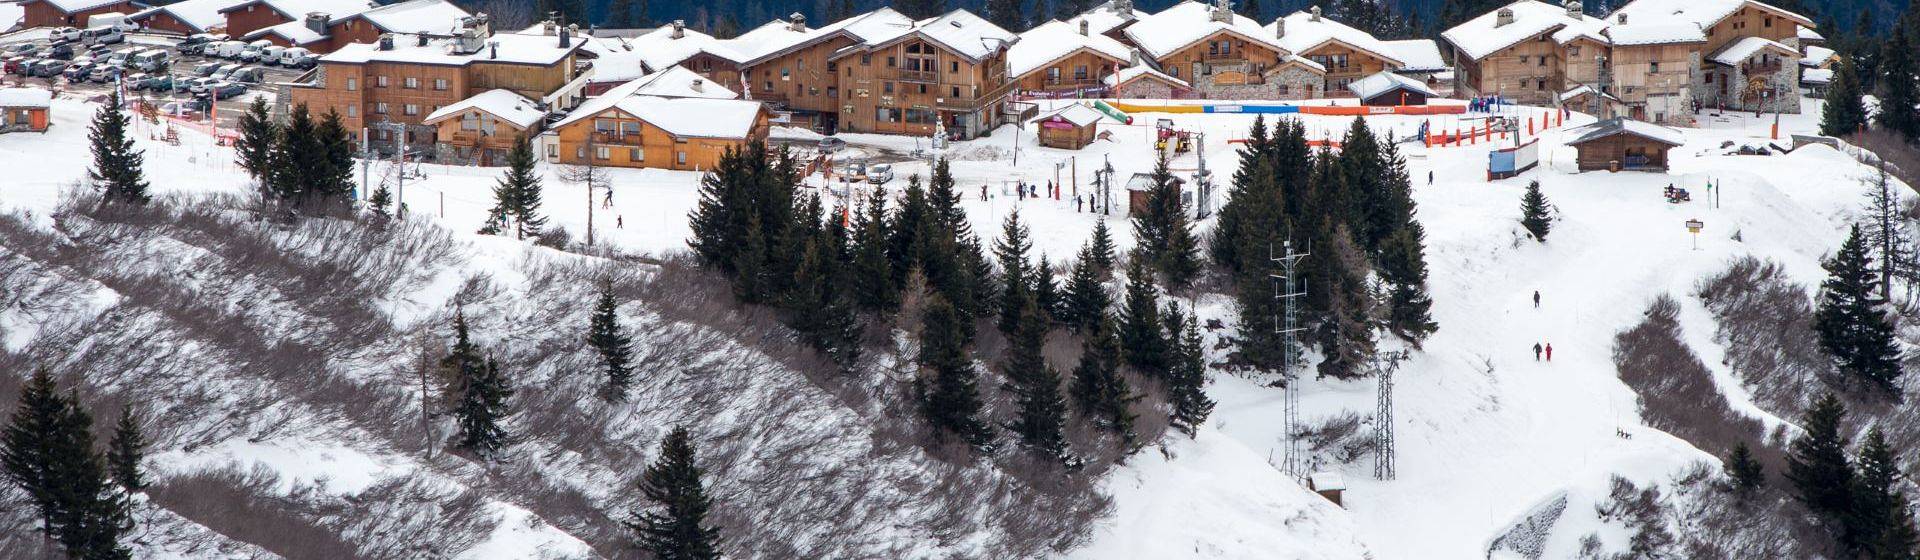 Holidays to La Rosiere Image